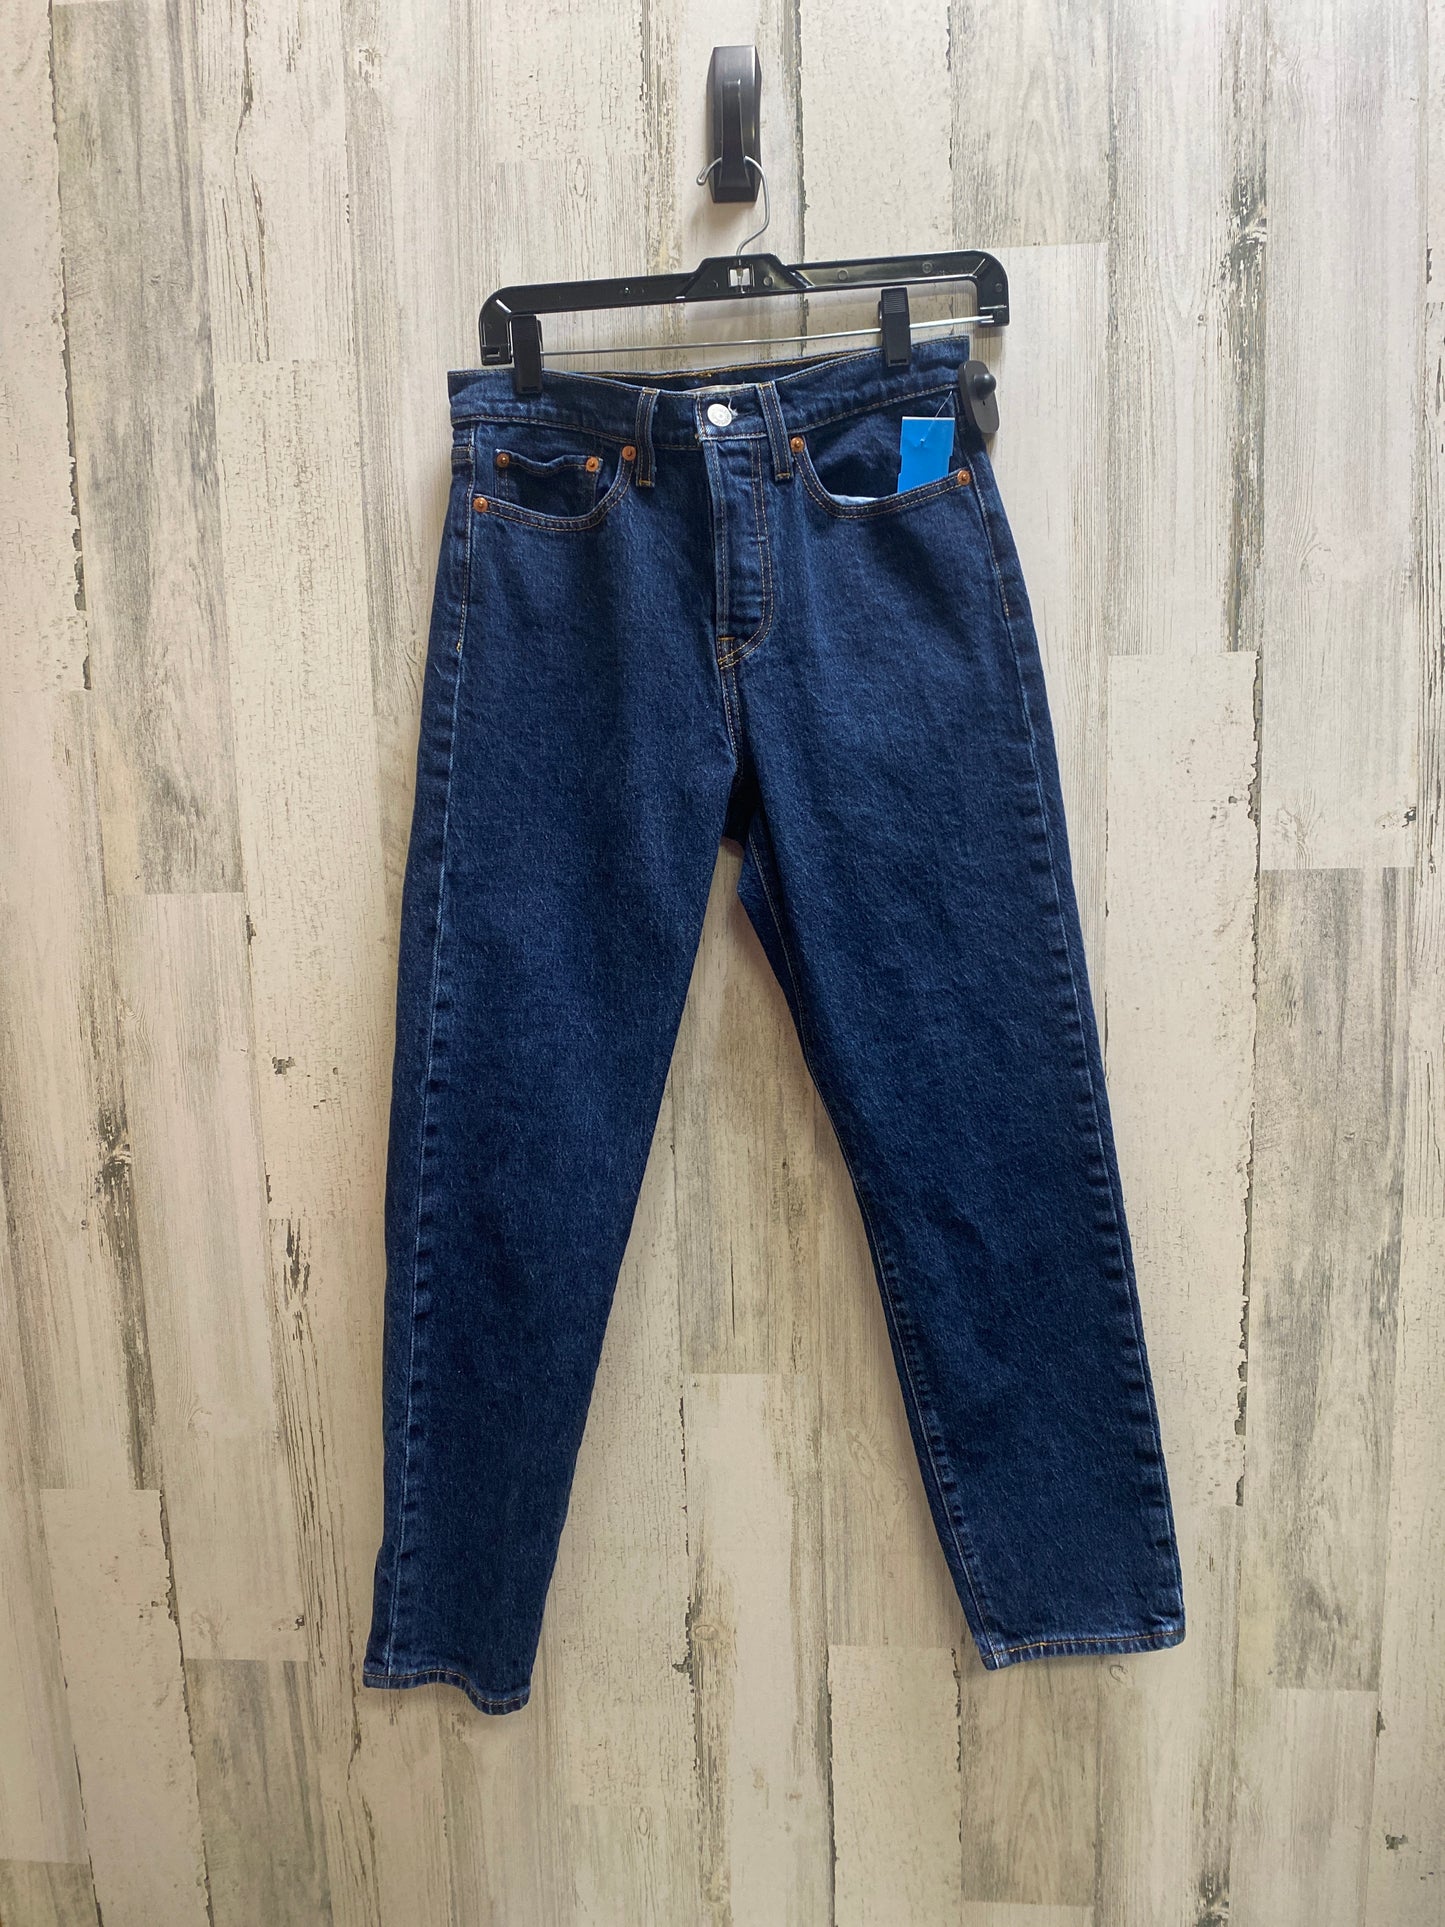 Jeans Relaxed/boyfriend By Levis  Size: 6